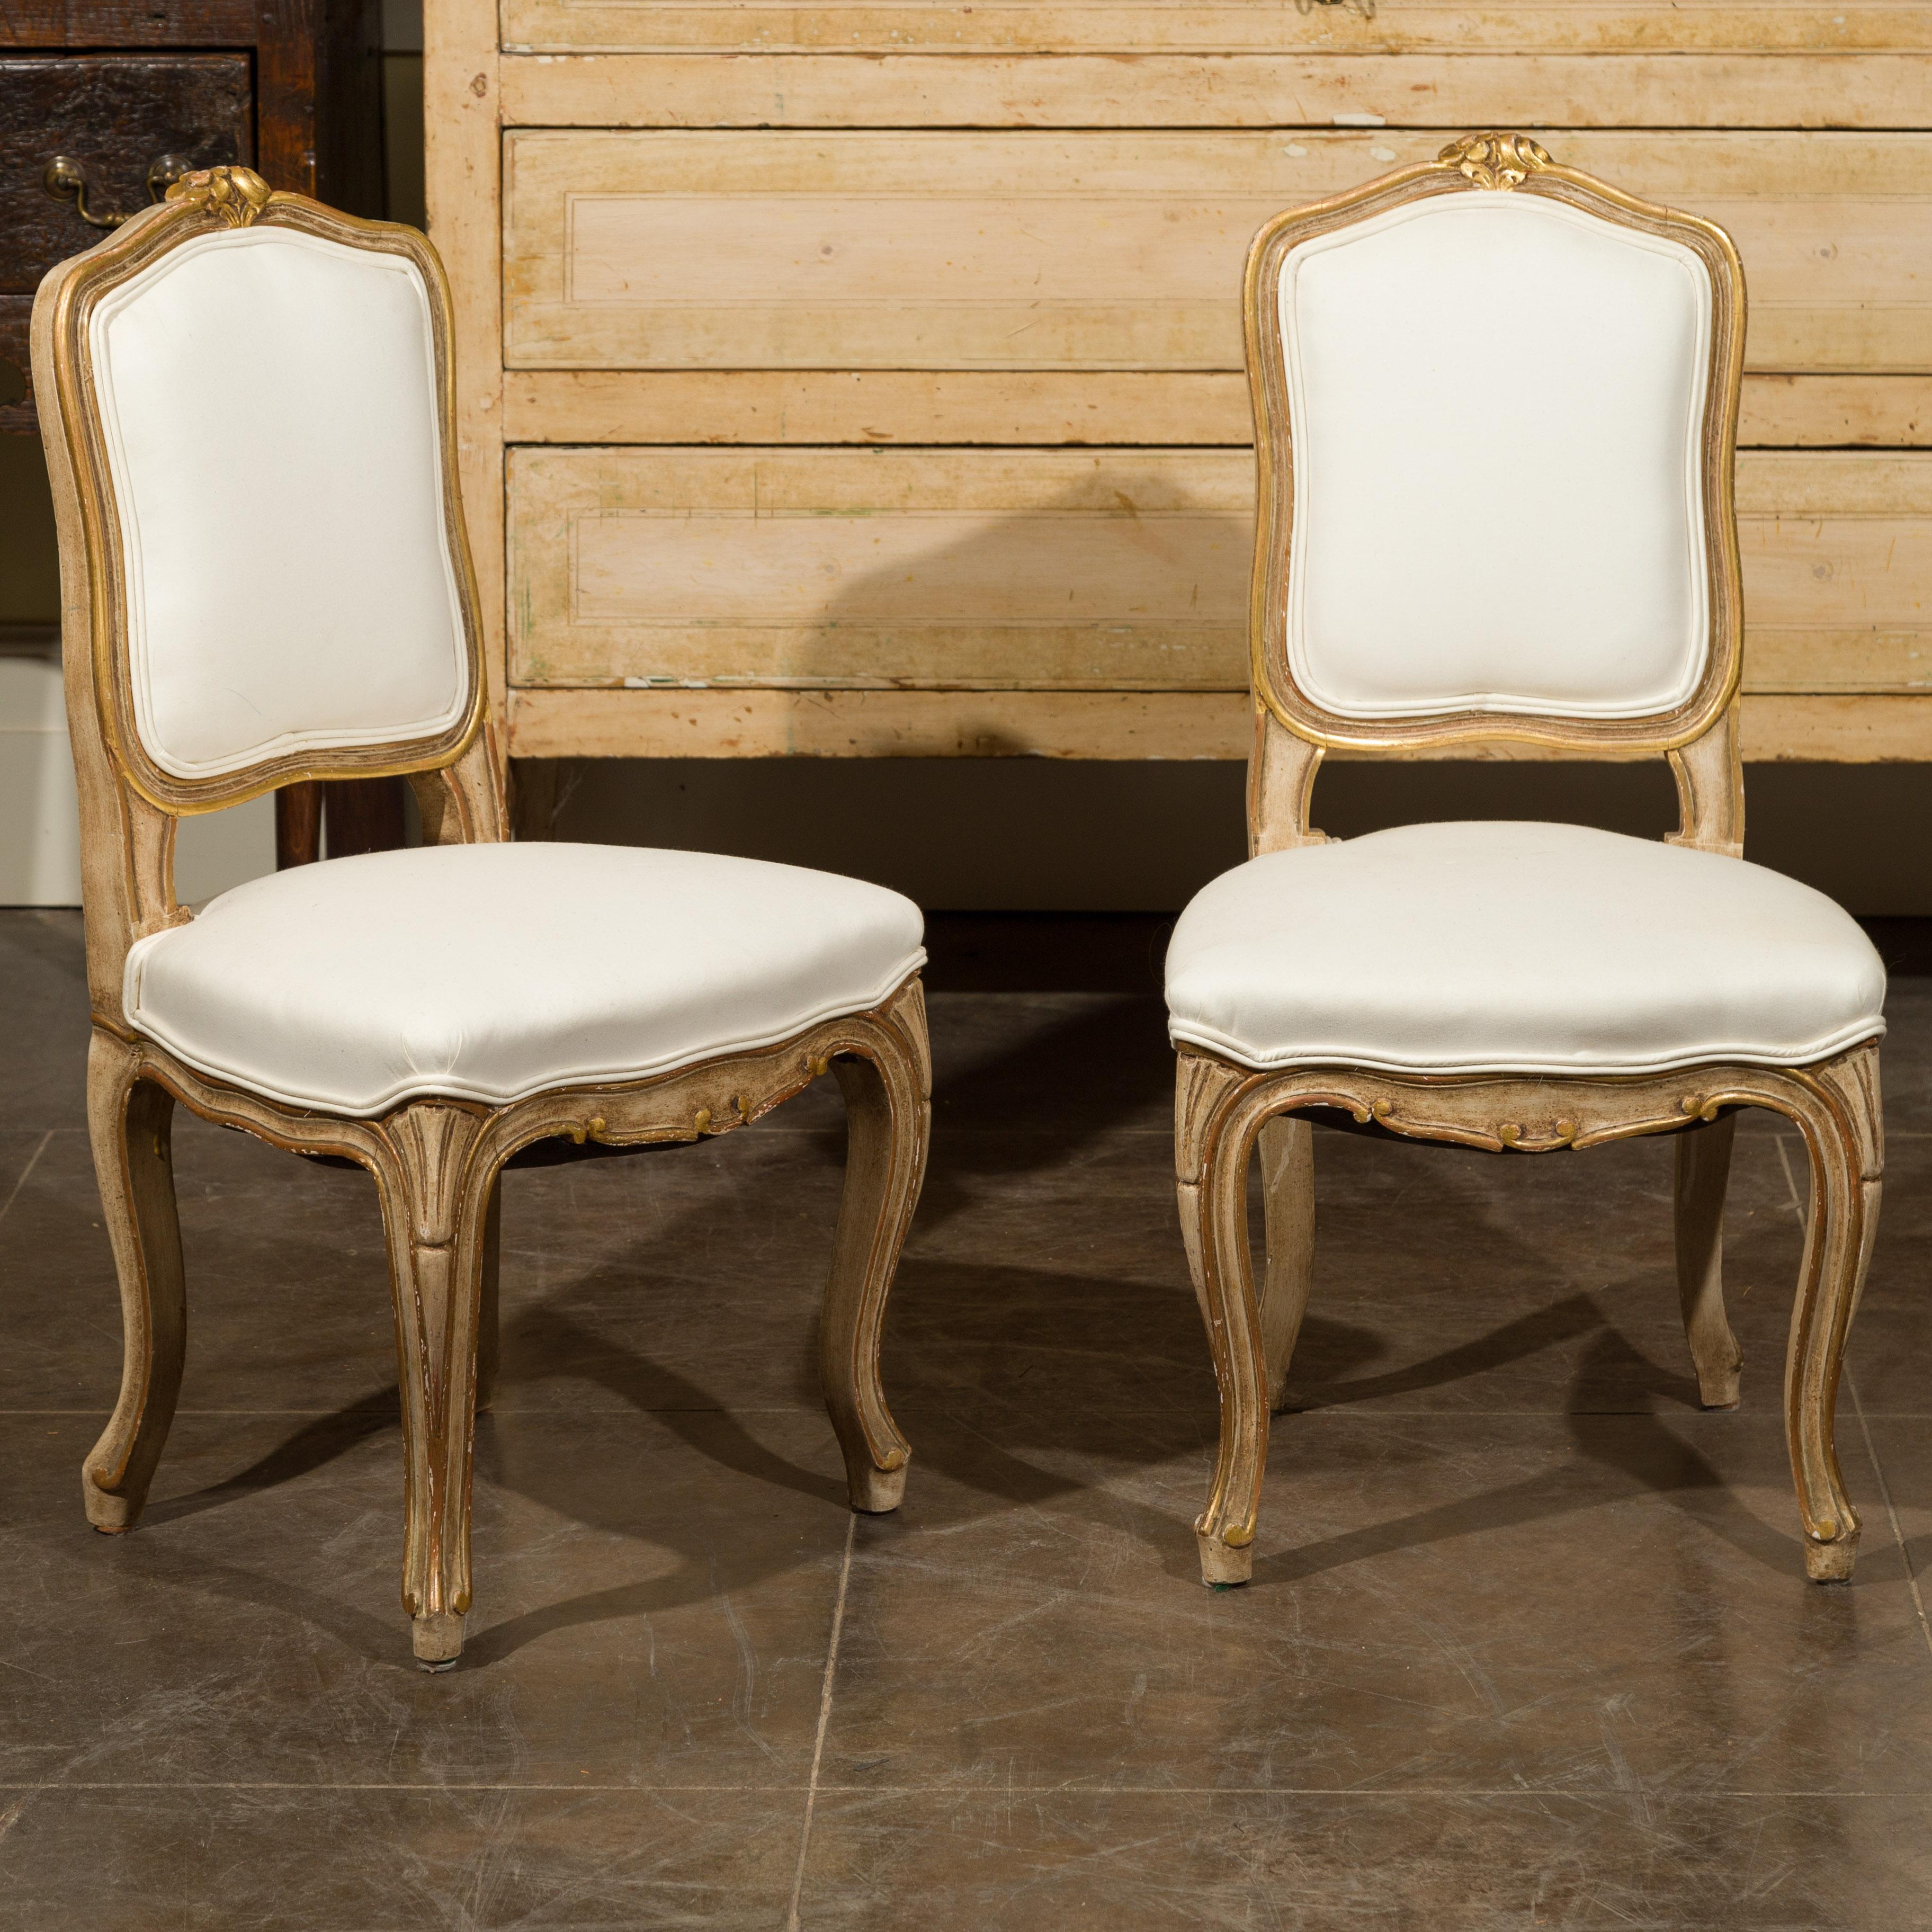 A pair of French Louis XV style painted and gilt wooden child's side chairs from the early 20th century, with carved flowers and new upholstery. Created in France during the first quarter of the 20th century, each of this pair of child's chairs